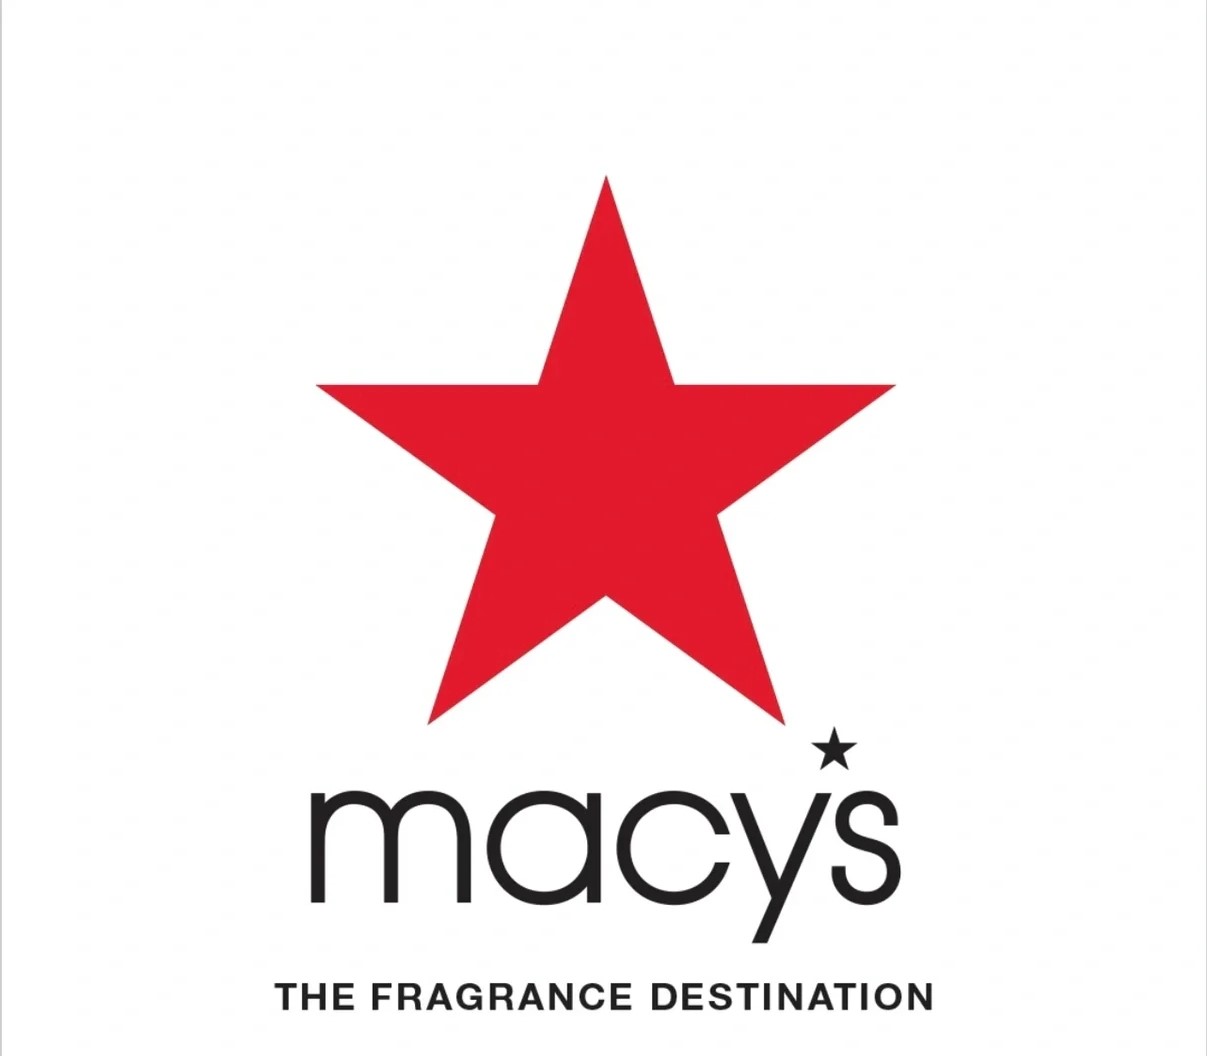 New Free Fragrance Sample Box from Macy’s